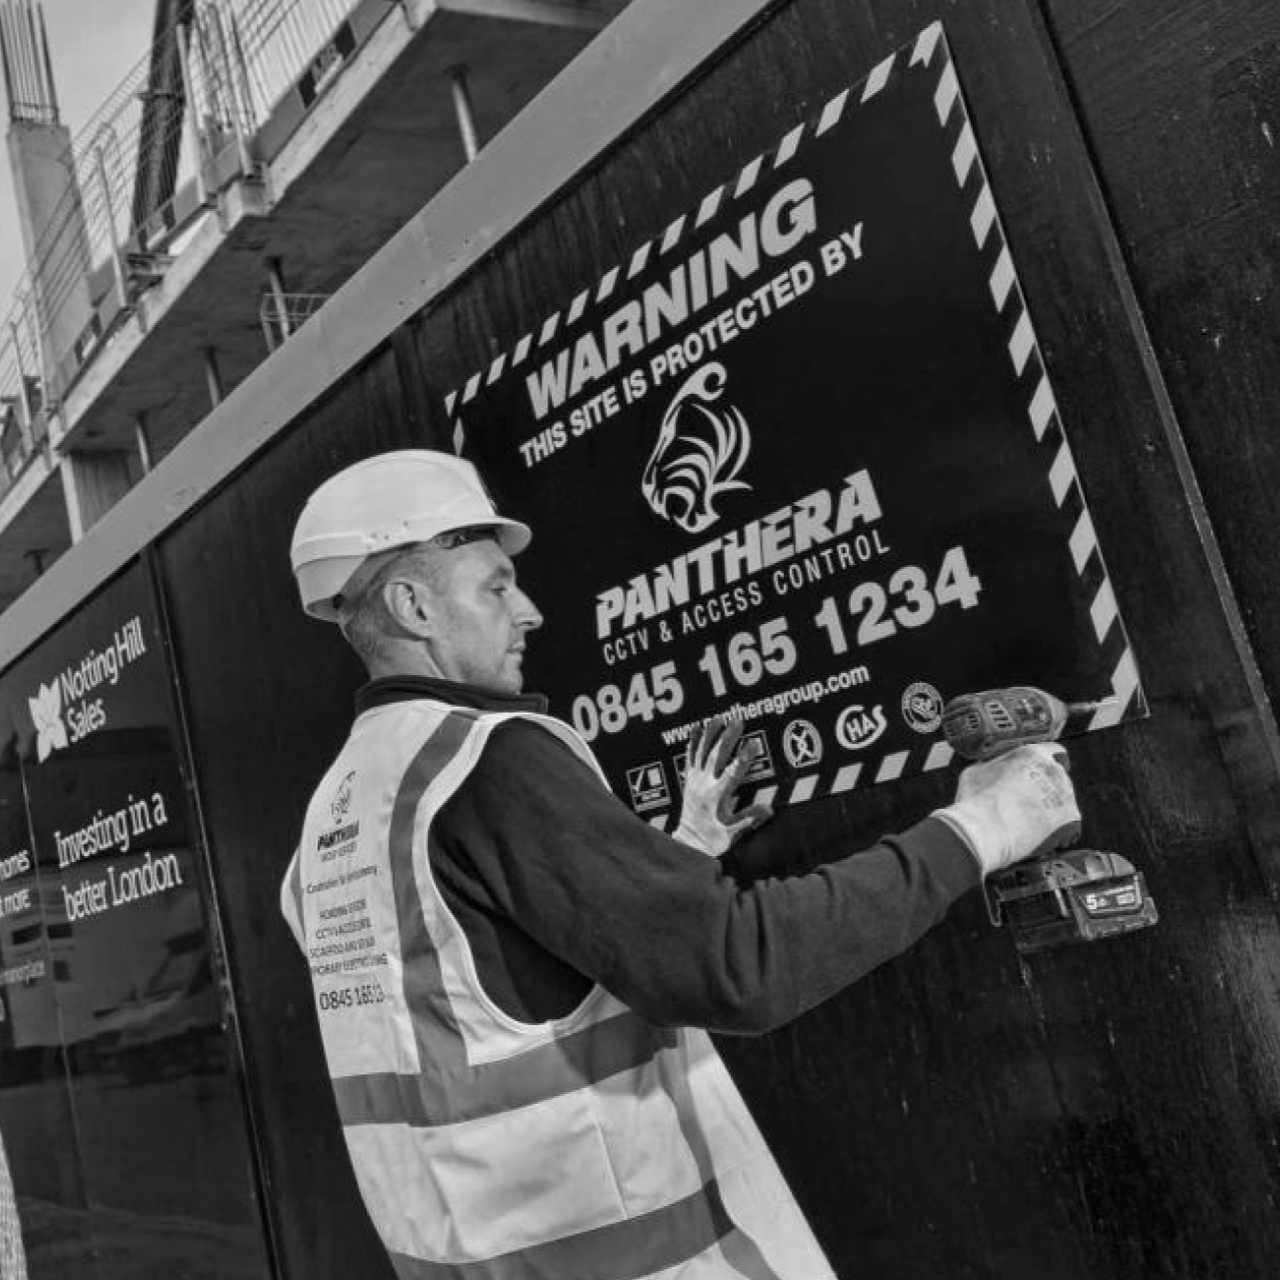 Man working on construction site putting up Panthera sign